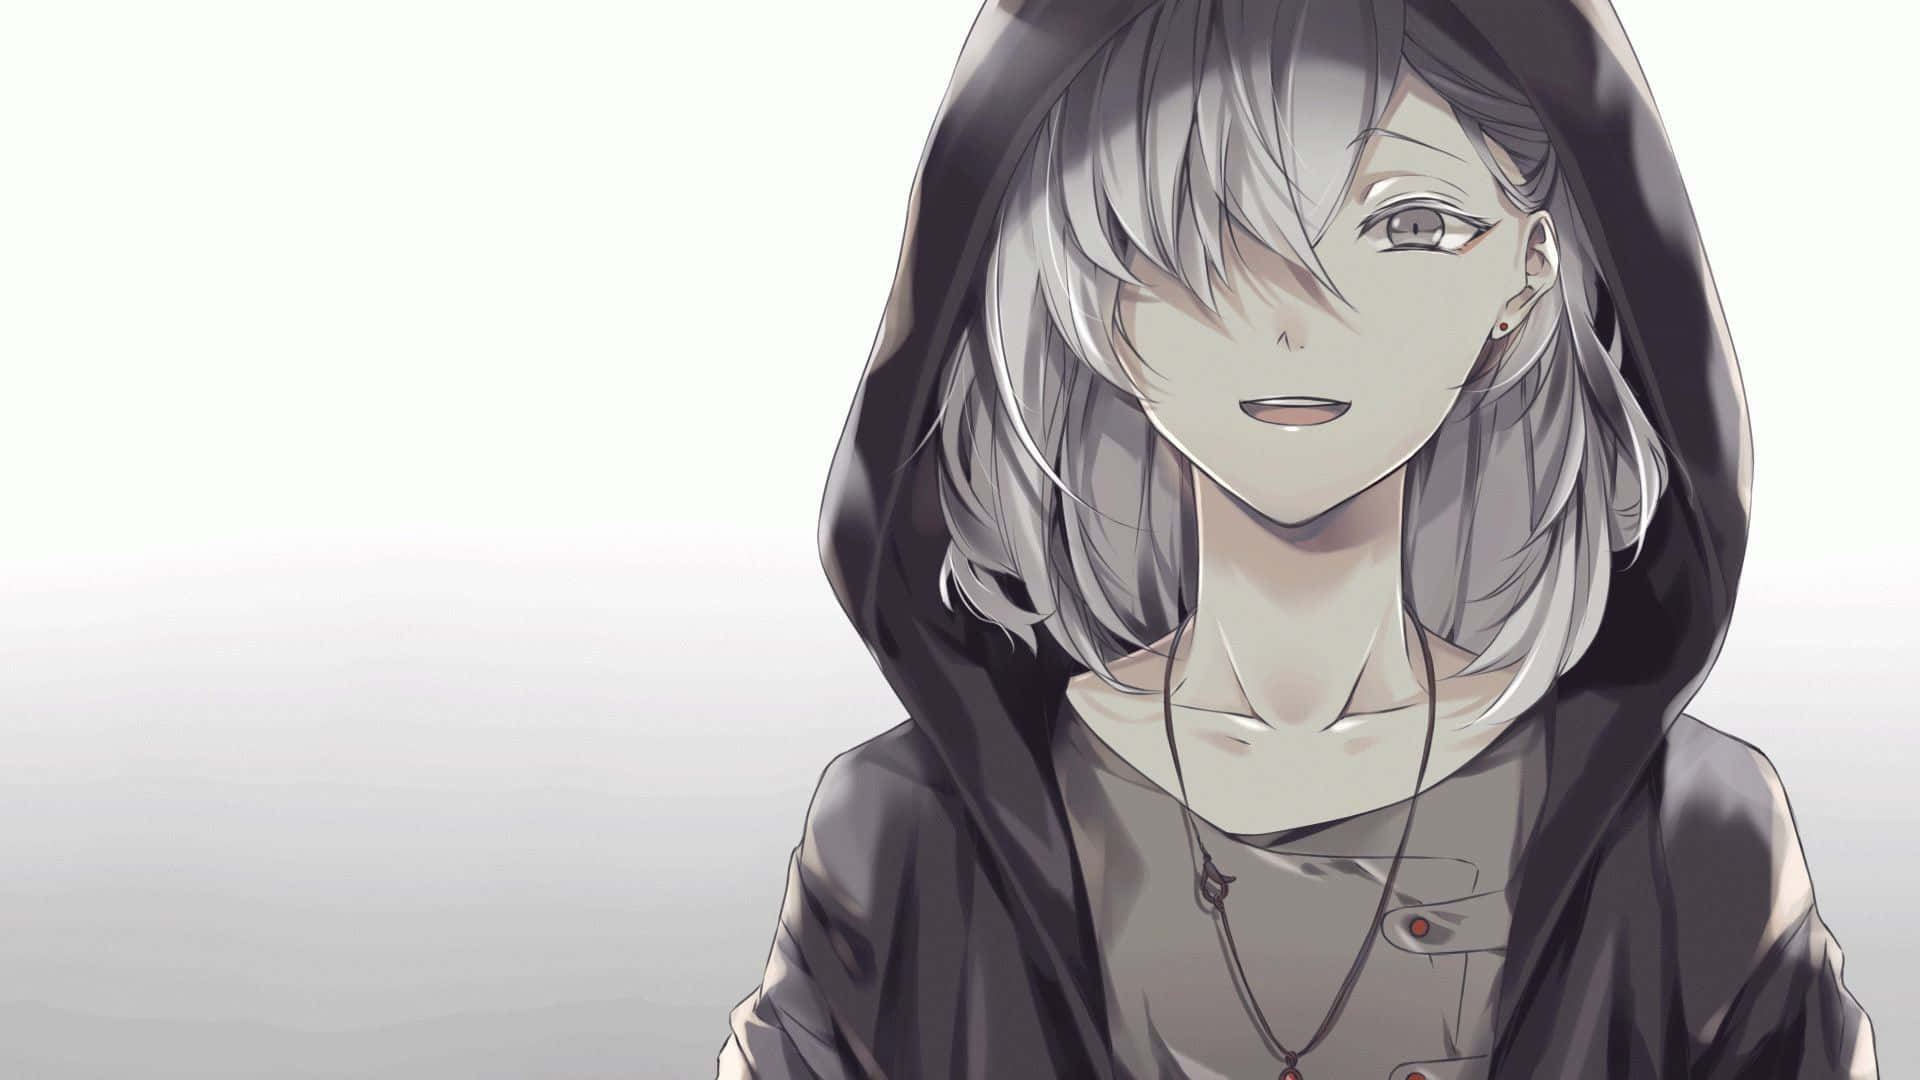 A Girl In A Black Hoodie With Grey Hair